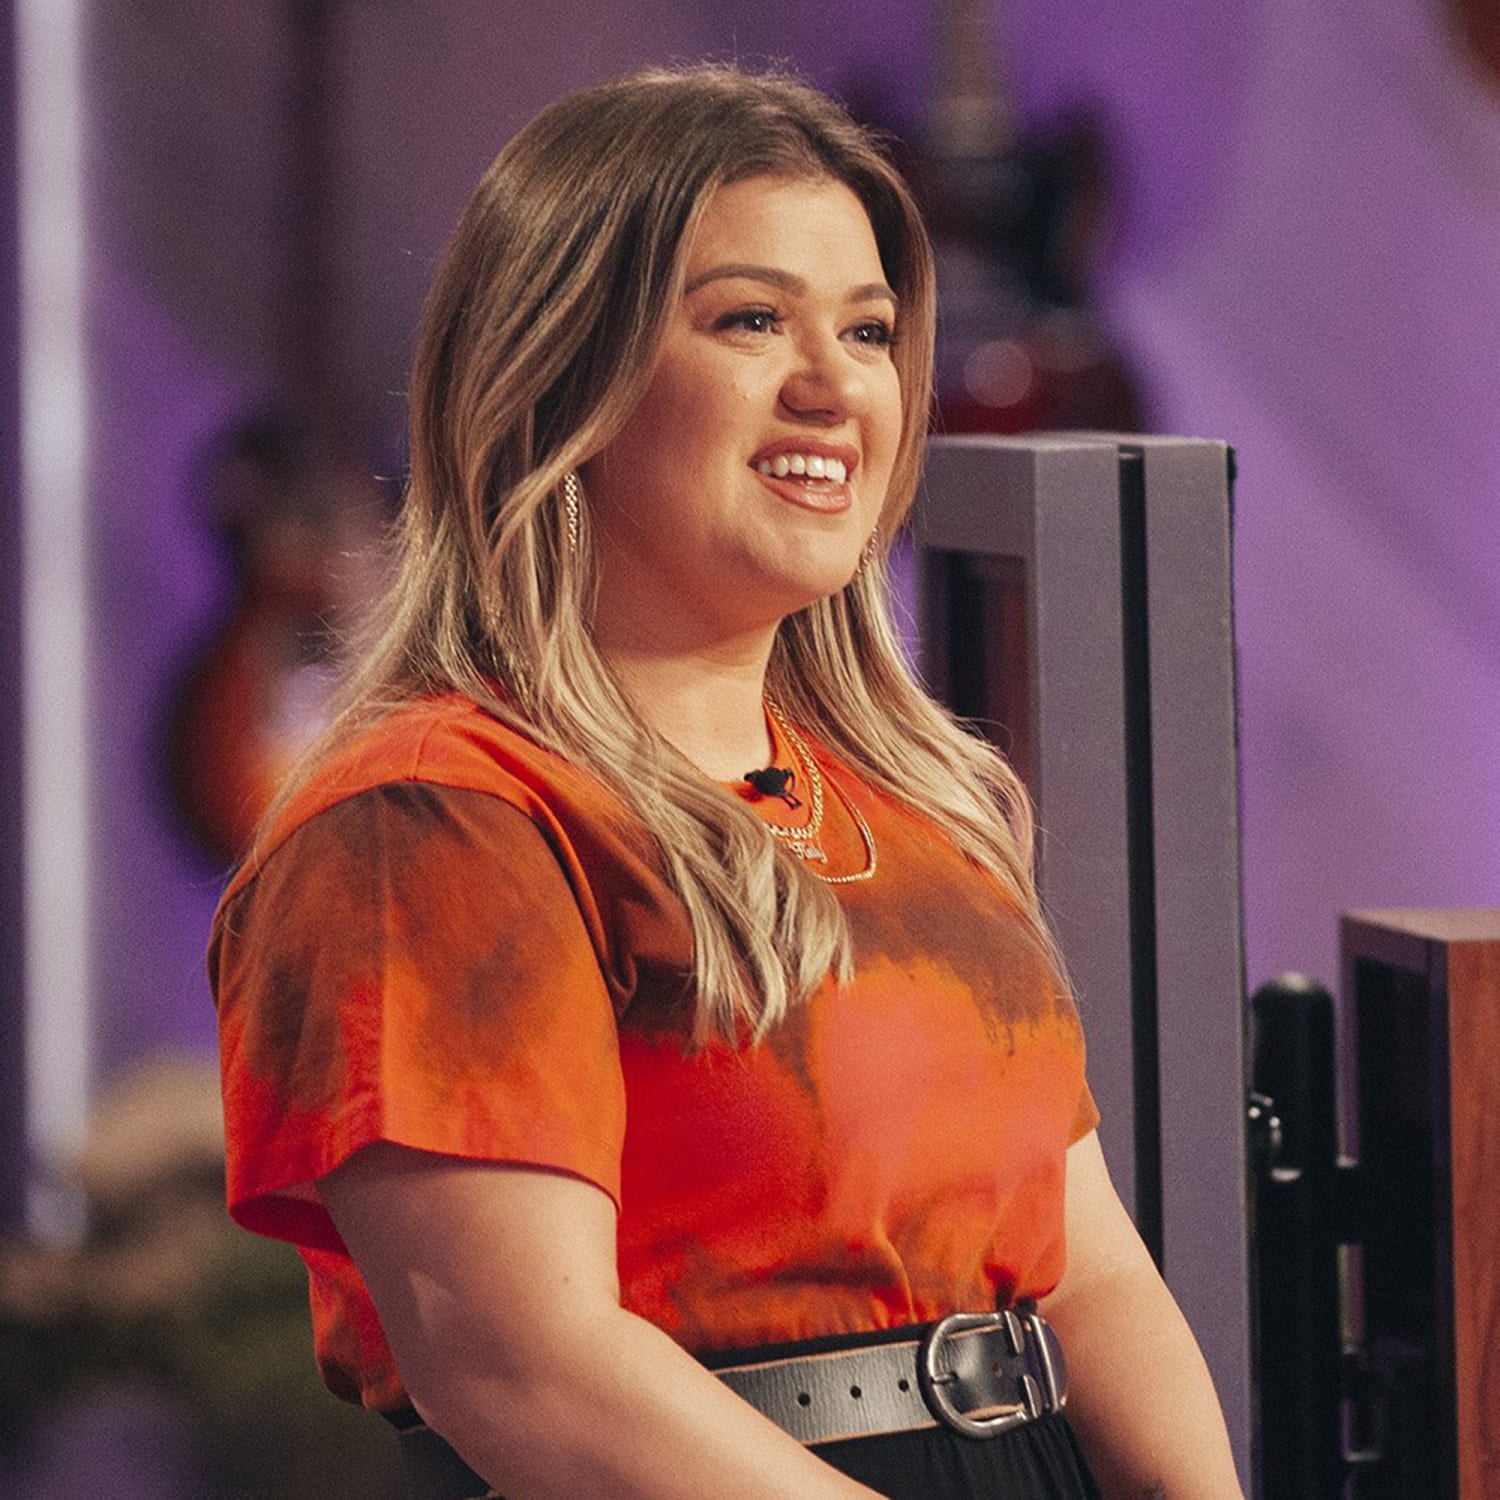 Kelly Clarkson reveals the 1 thing she hates that guys do when they date her